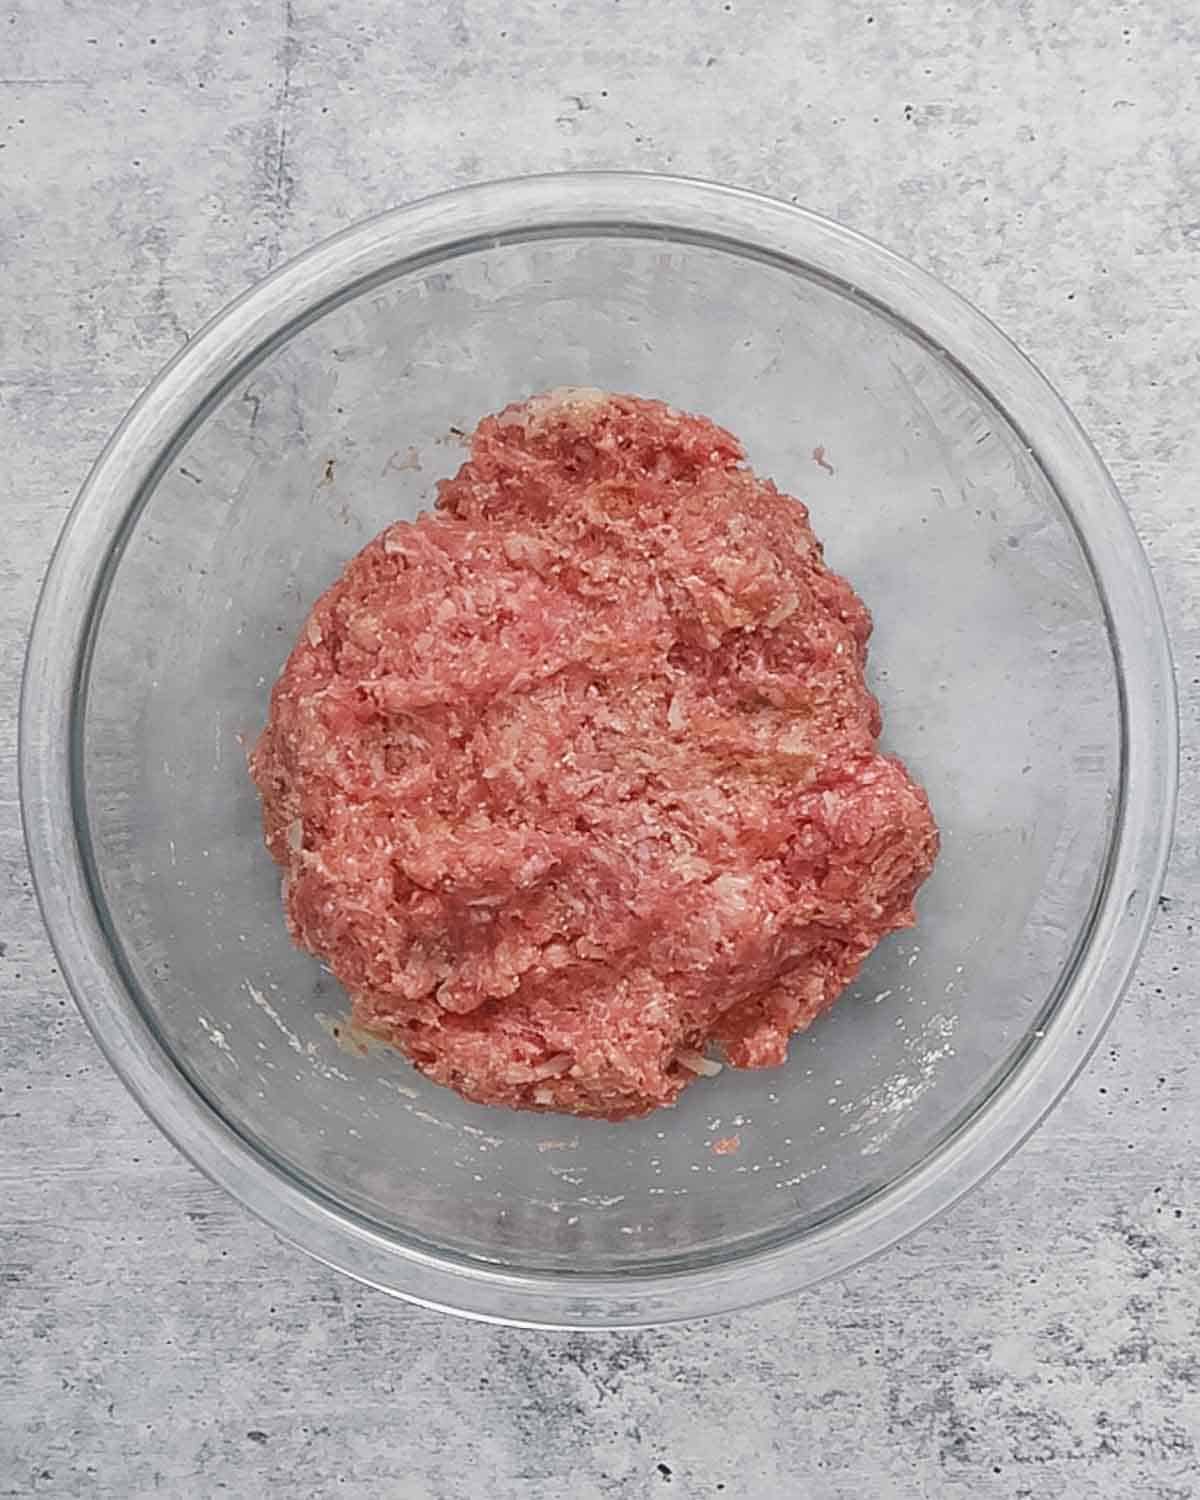 Meatballs ingredients in a mixing bowl mixed.